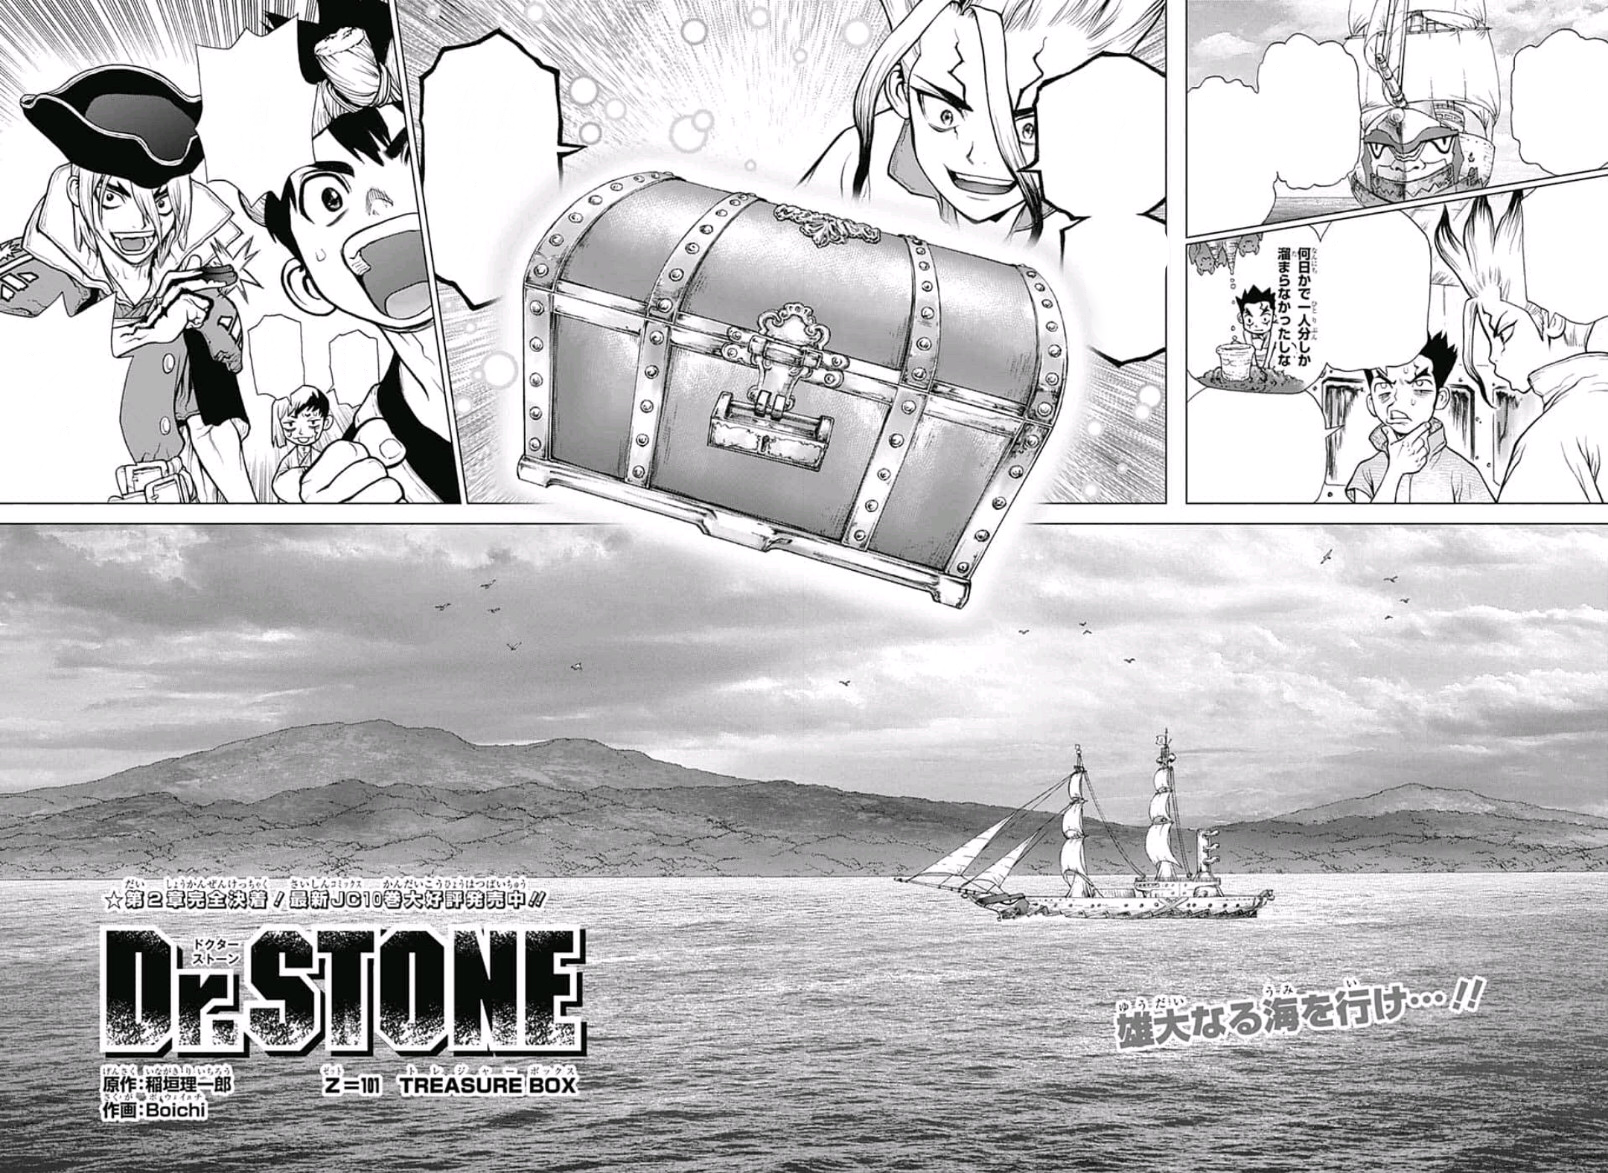 Dr. Stone: New World Part 2 Reveals Theme Song Artist and Release